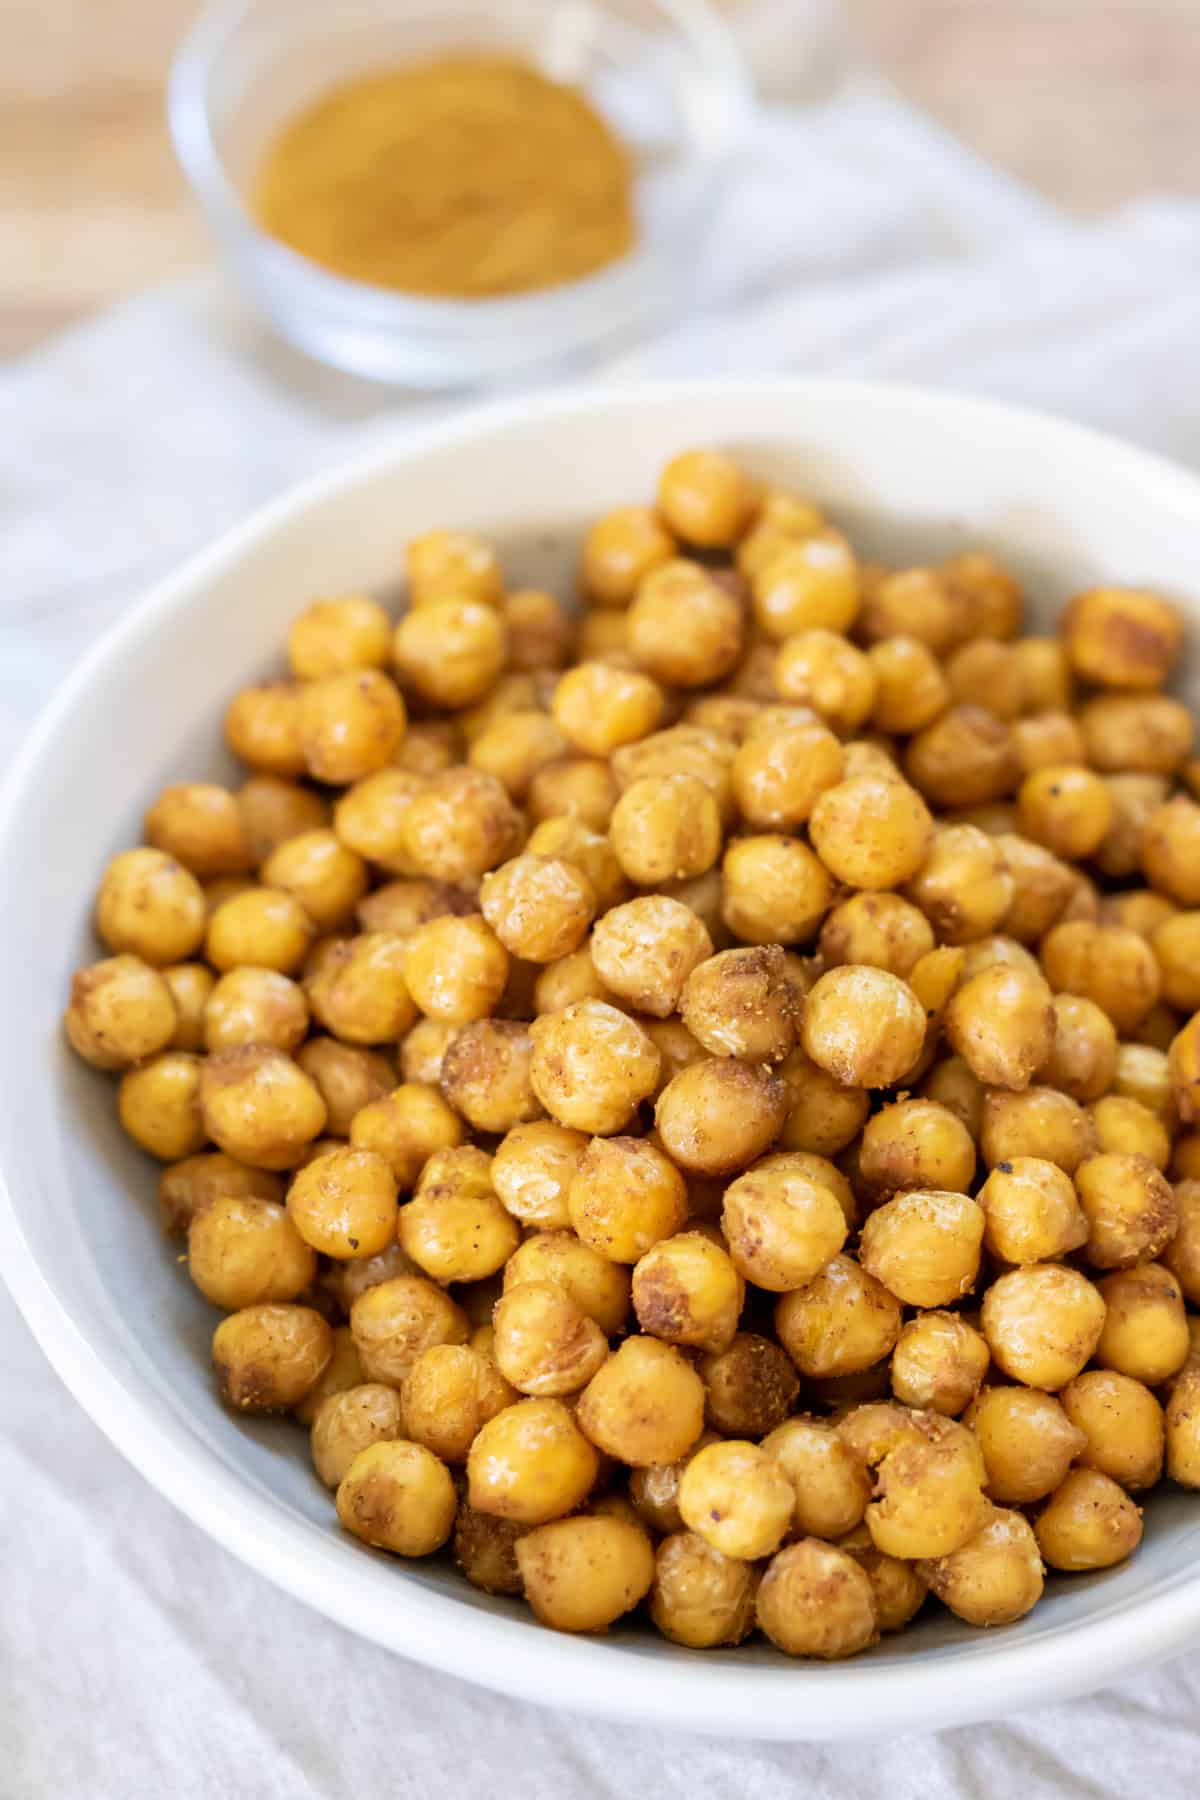 Table with a bowl of air fried chickpeas next to a dish of spices.